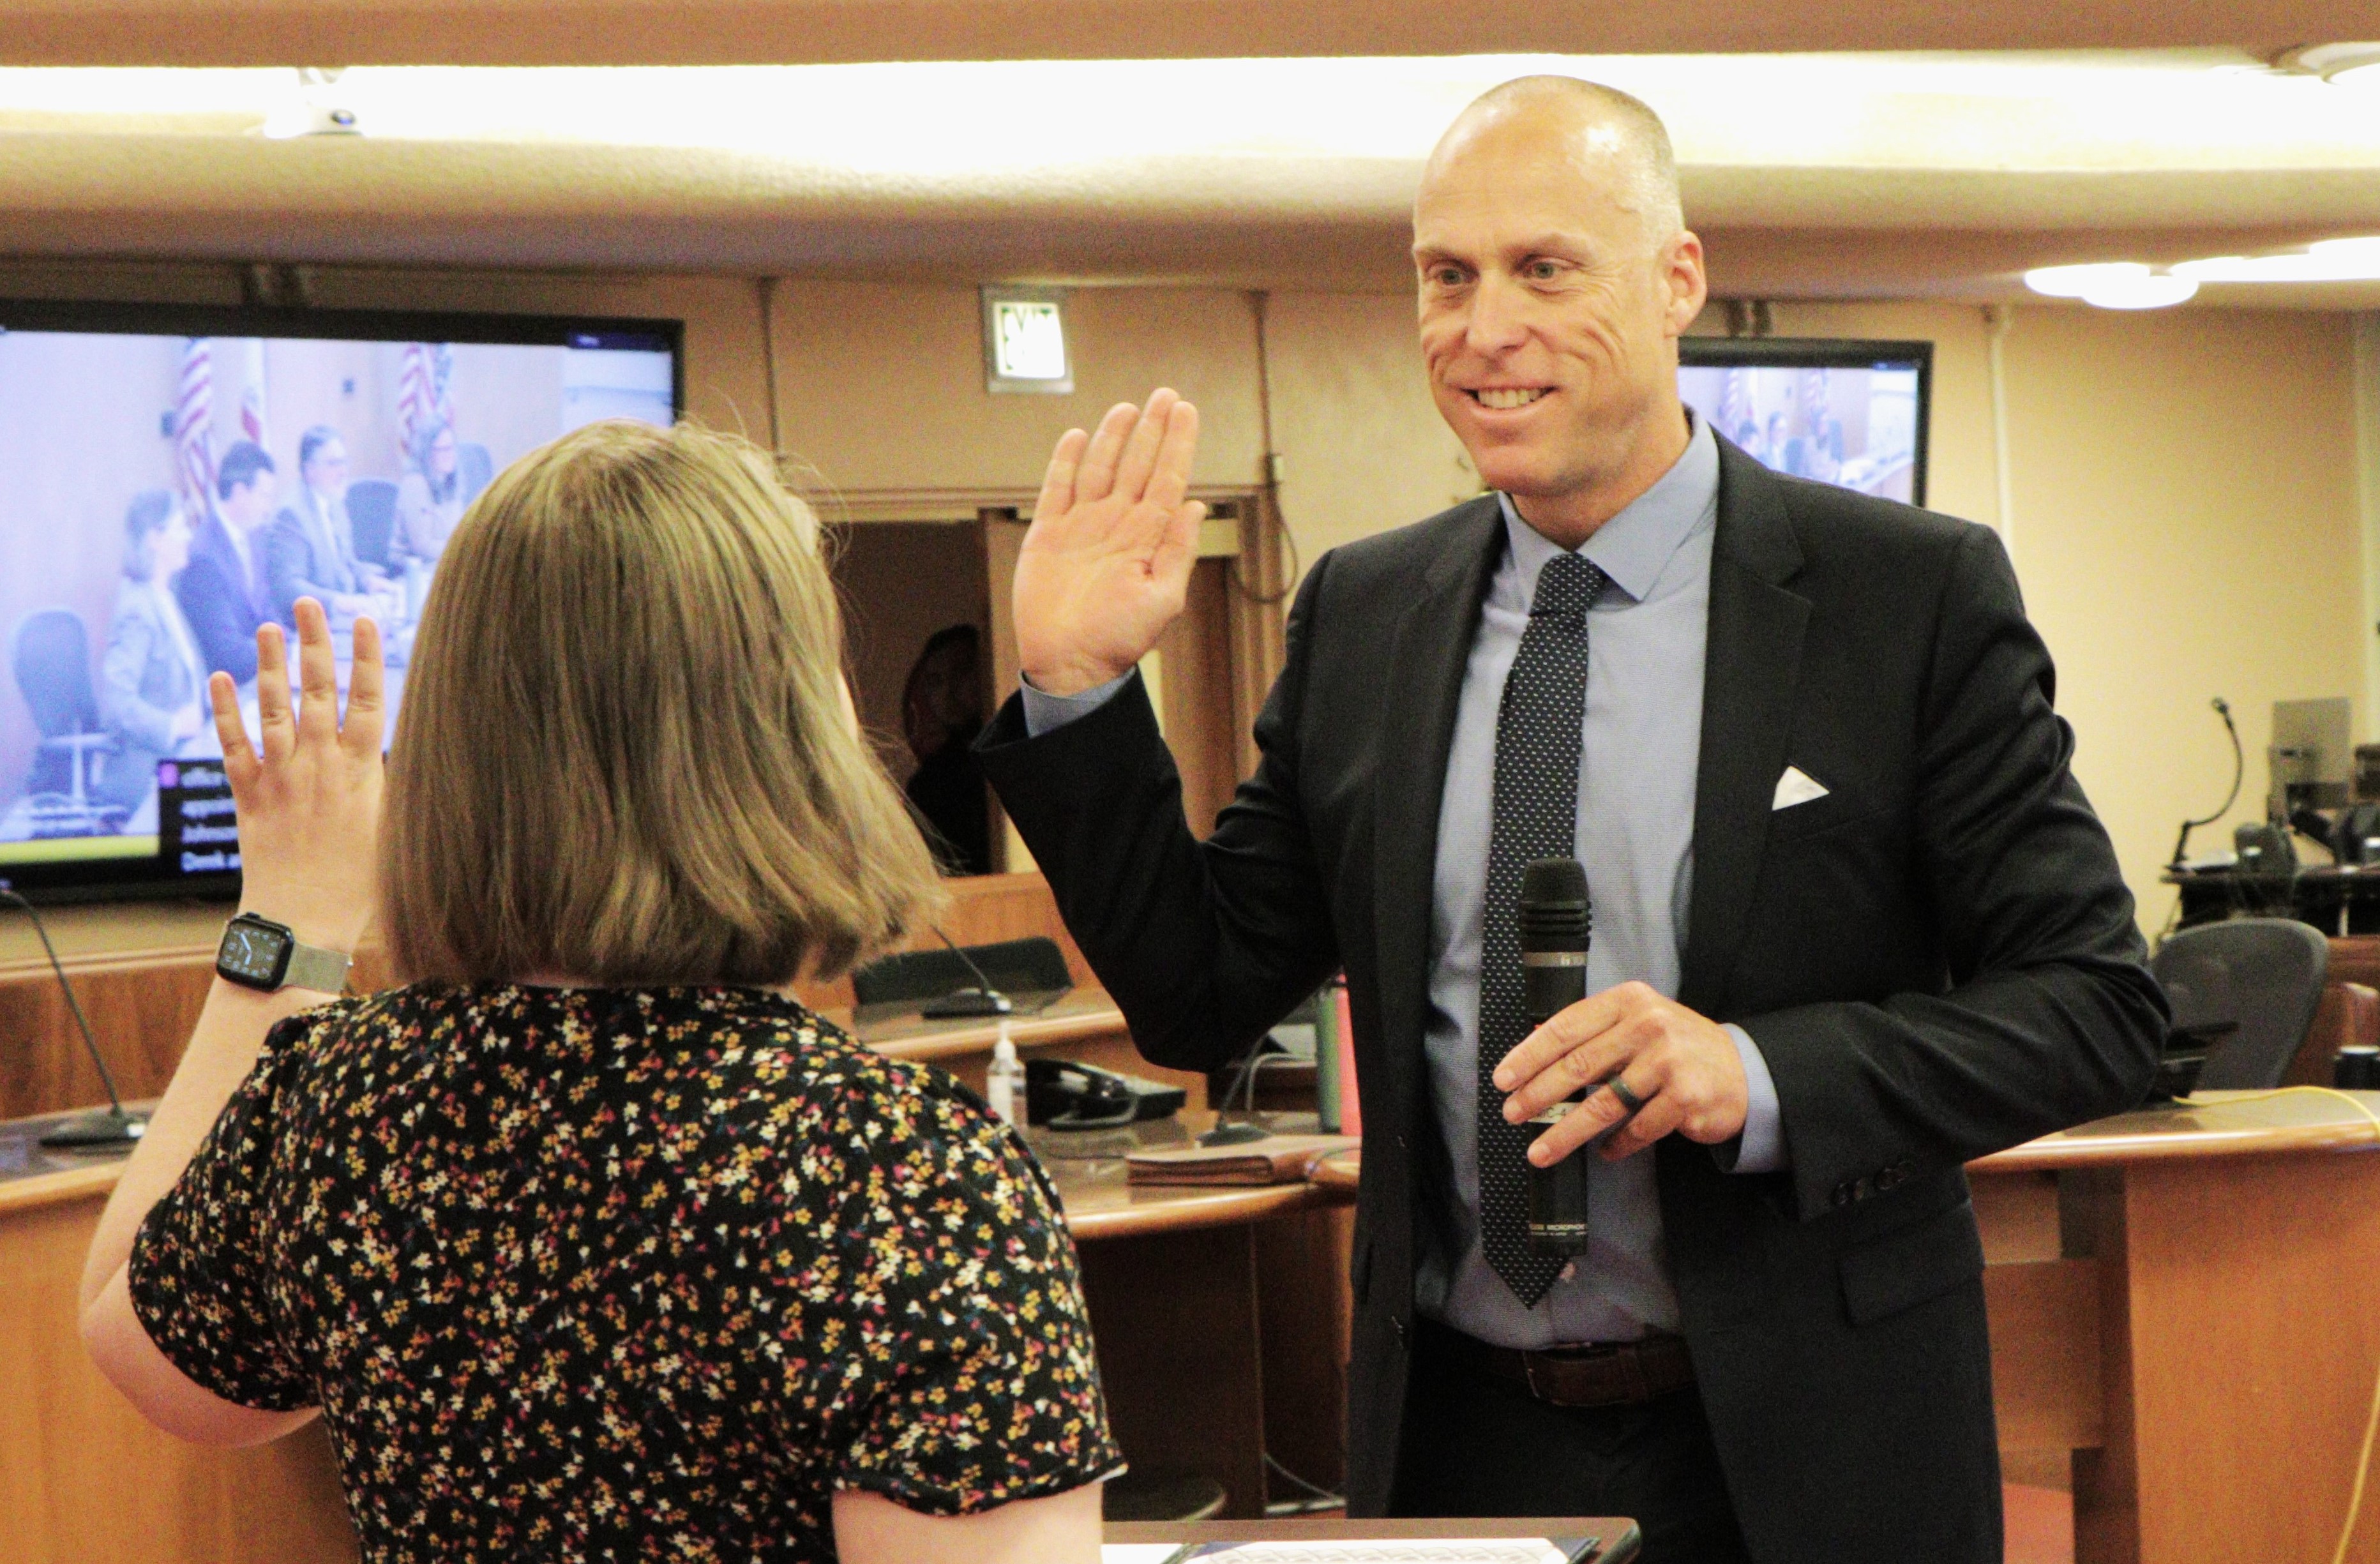 County Executive Derek Johnson, right, holds up his hand as he accepts the oath of office from Board Clerk Karla Kacmar.